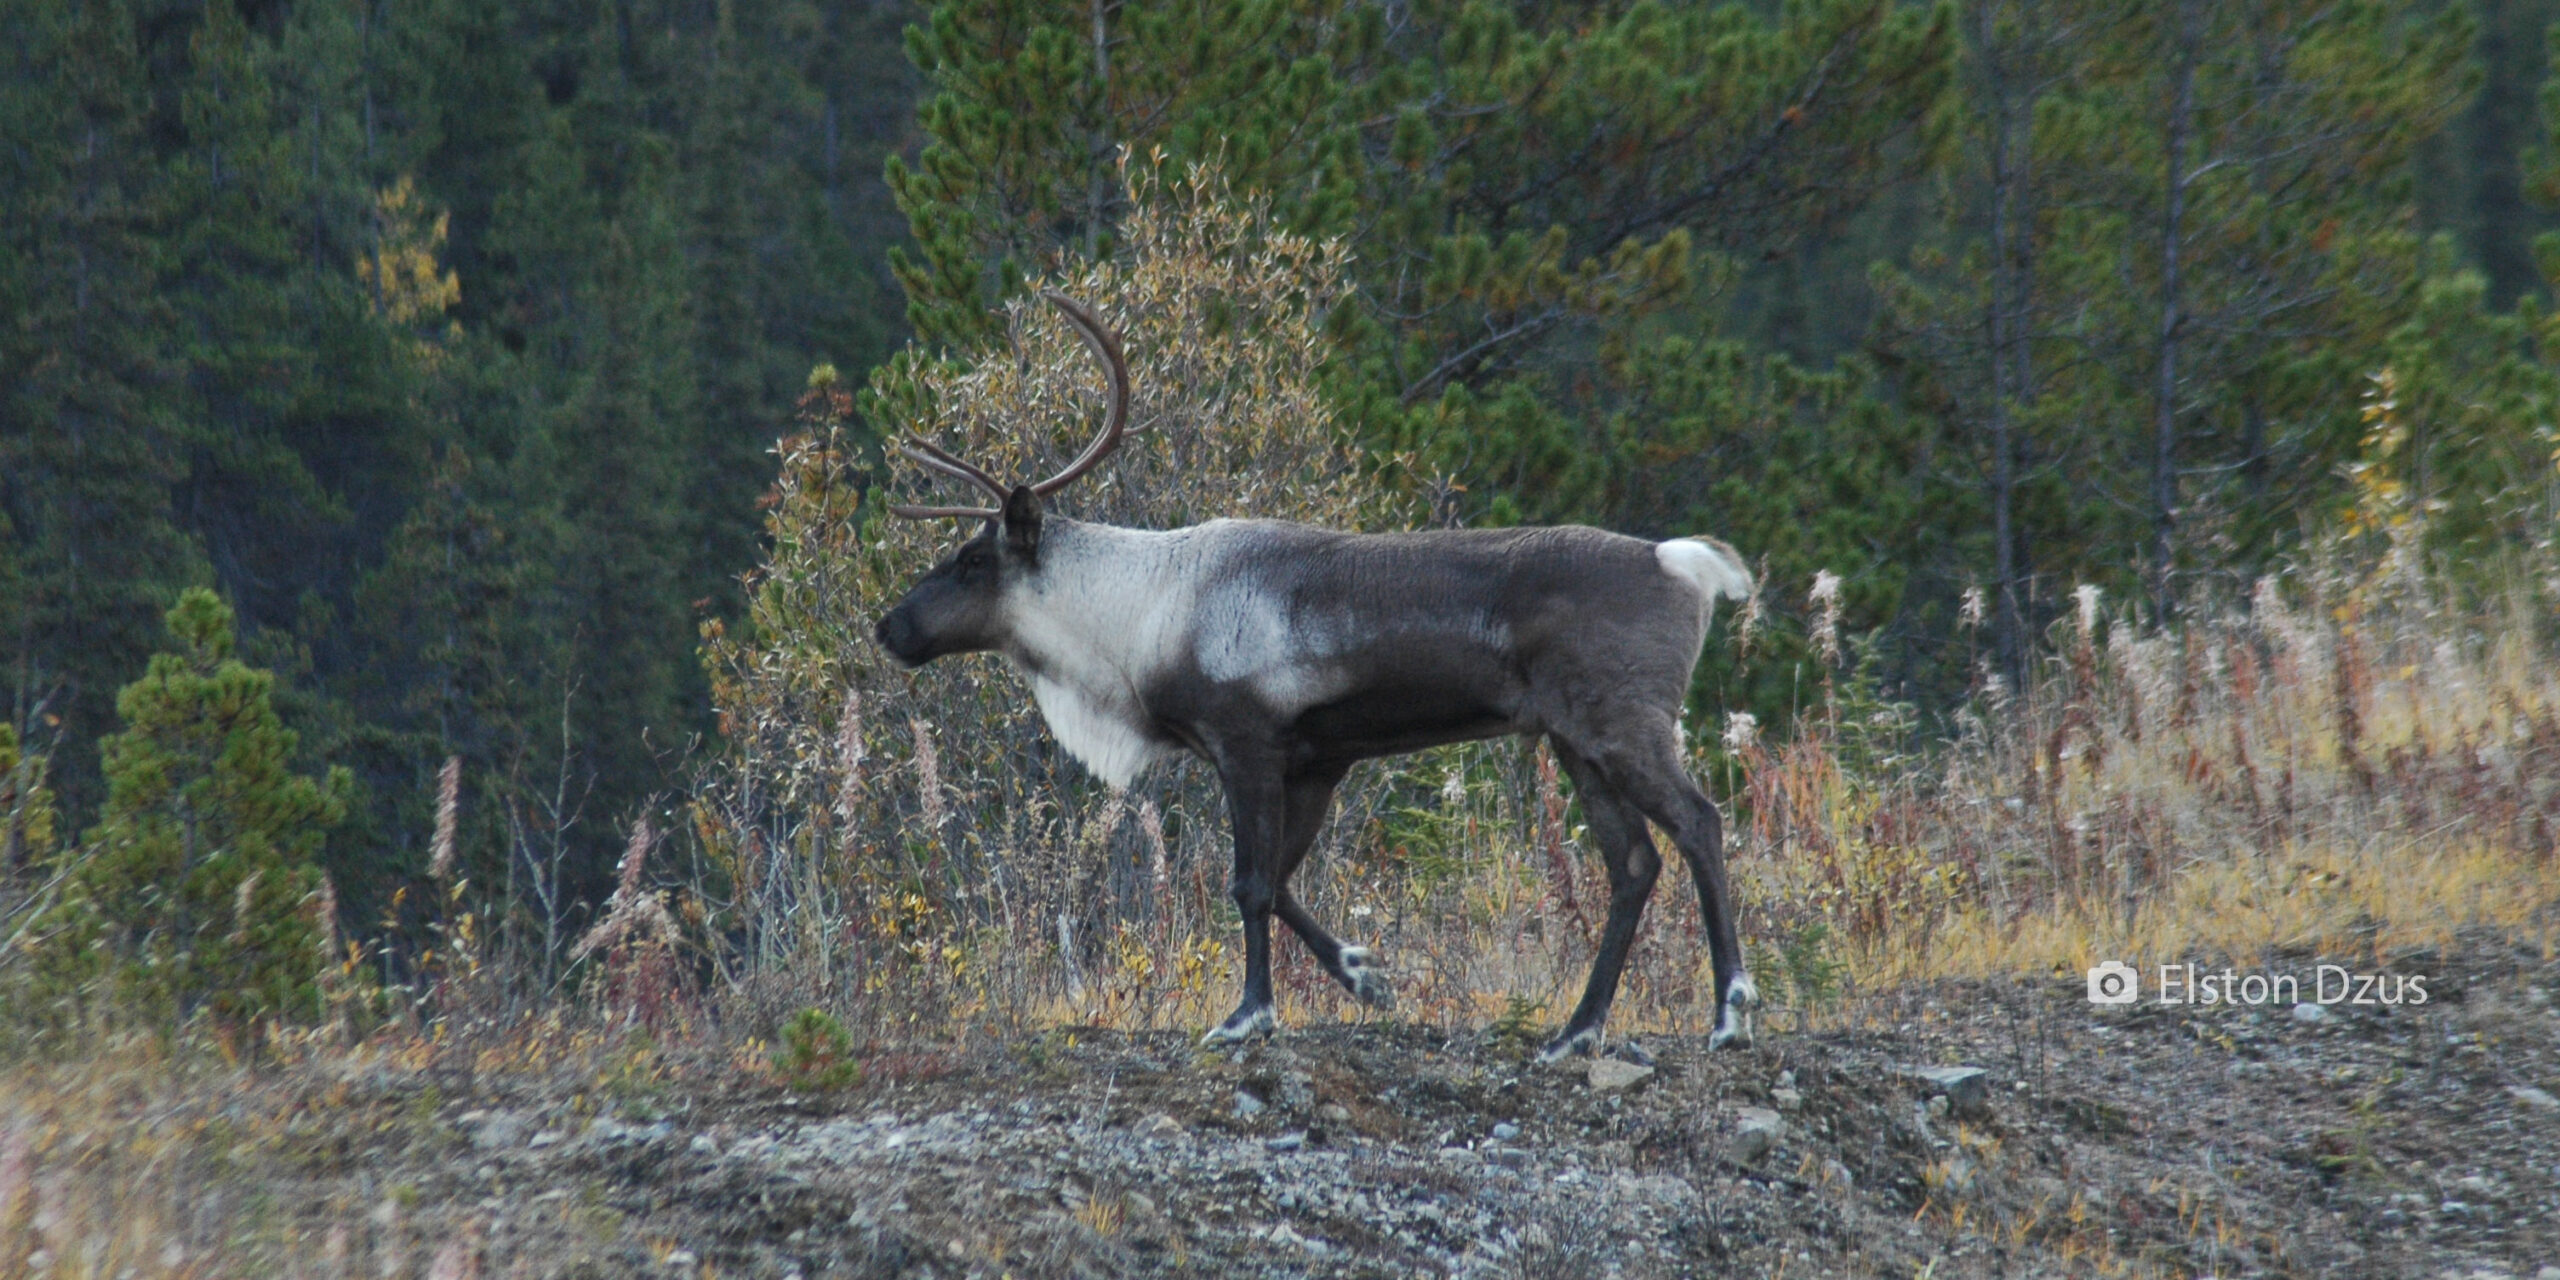 caribou walking against a background of deciduous trees. photo by Elston Dzus